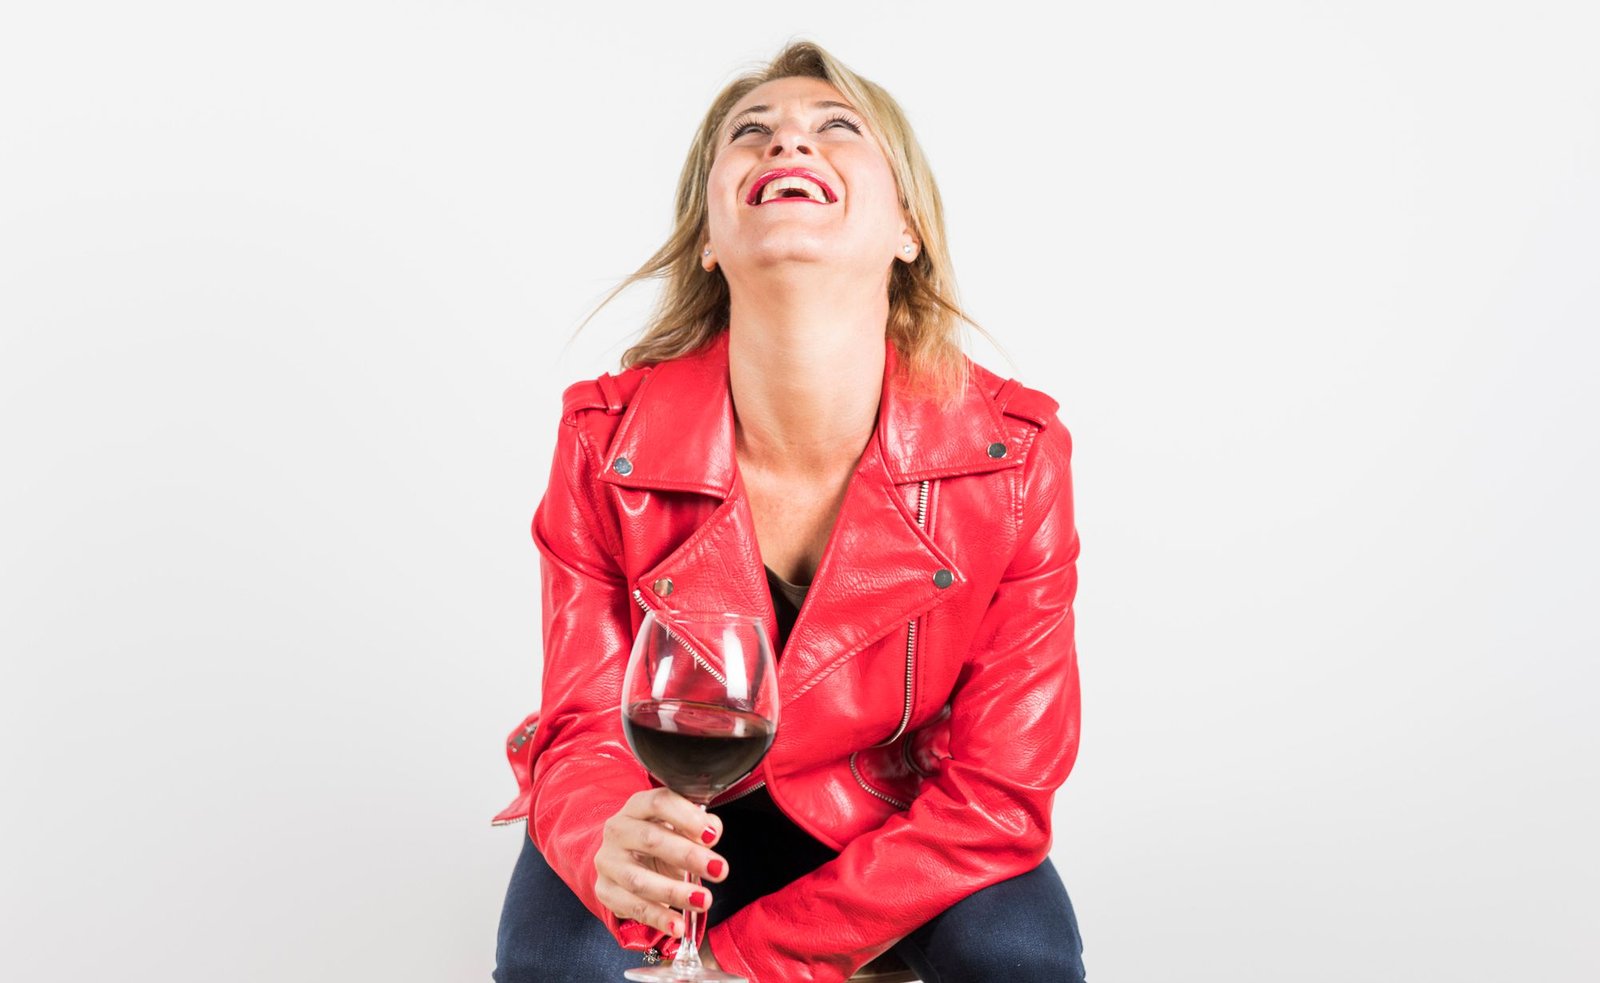 Woman-drinking-red-wine-with-a-red-leather-jacket-laughing